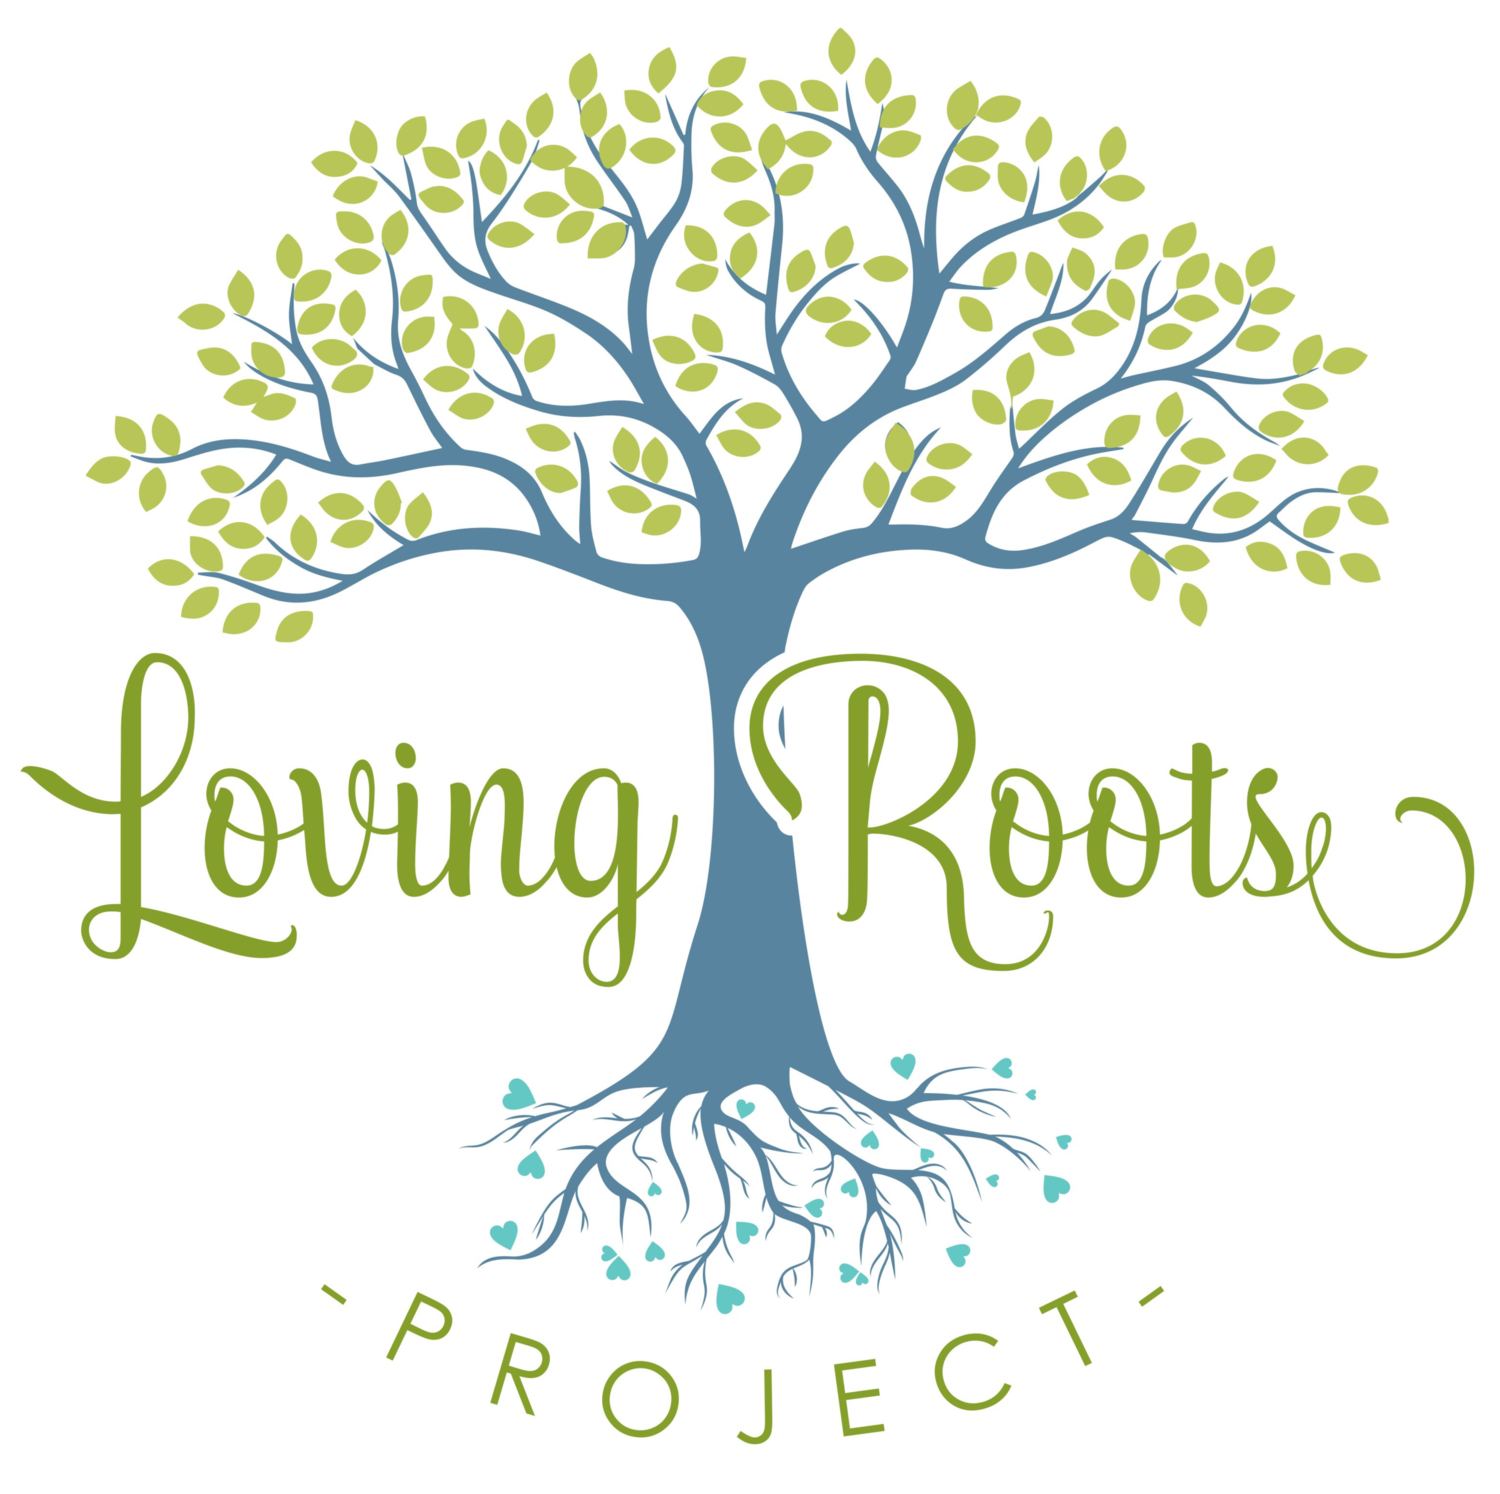 Loving Roots Project